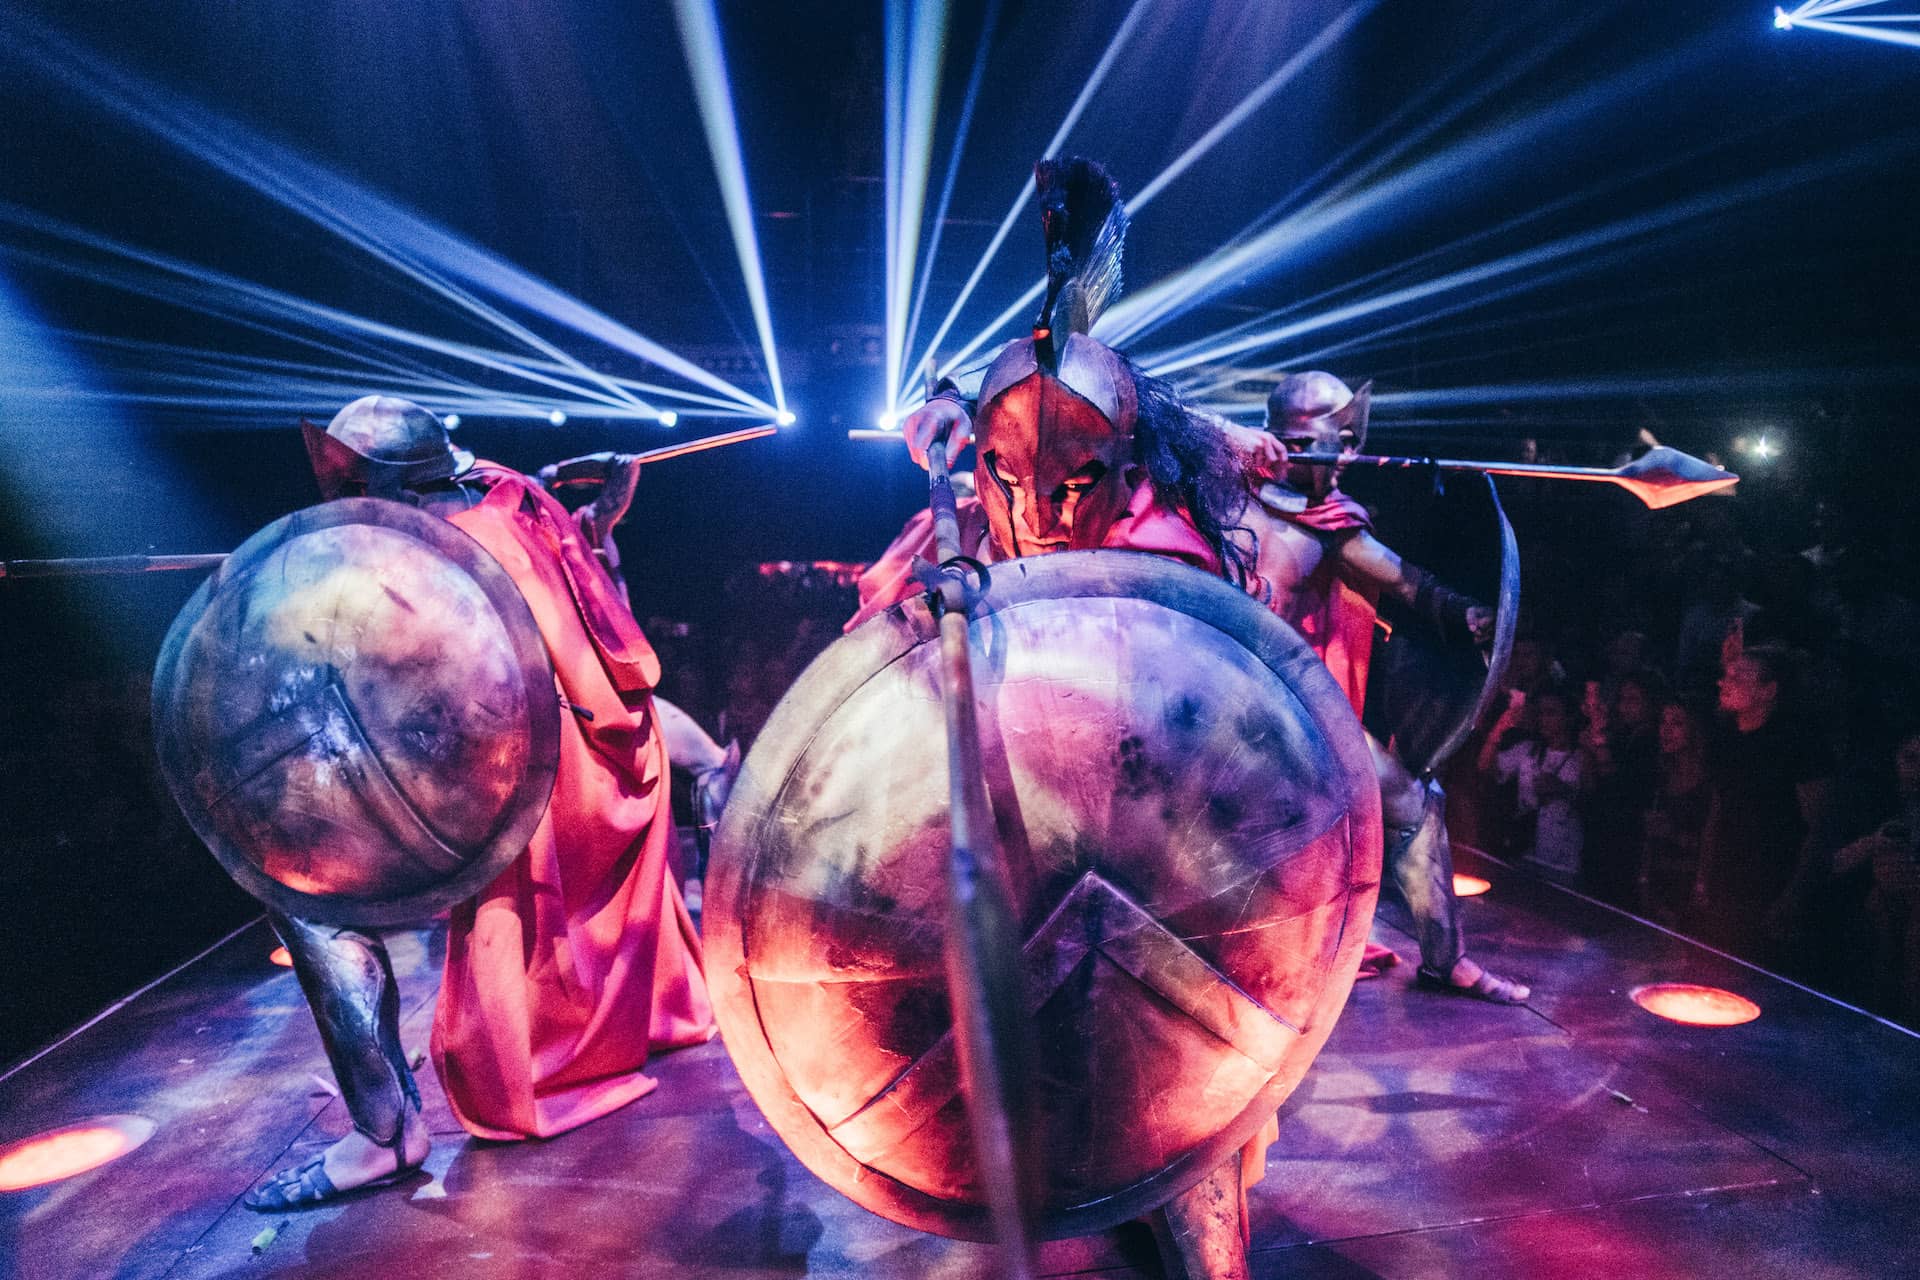 Inspired by the movie "300", in this show you will be able to witness the Spartans doing incredible stunts on cloth right above you. It's one of our classic shows that you can't miss!